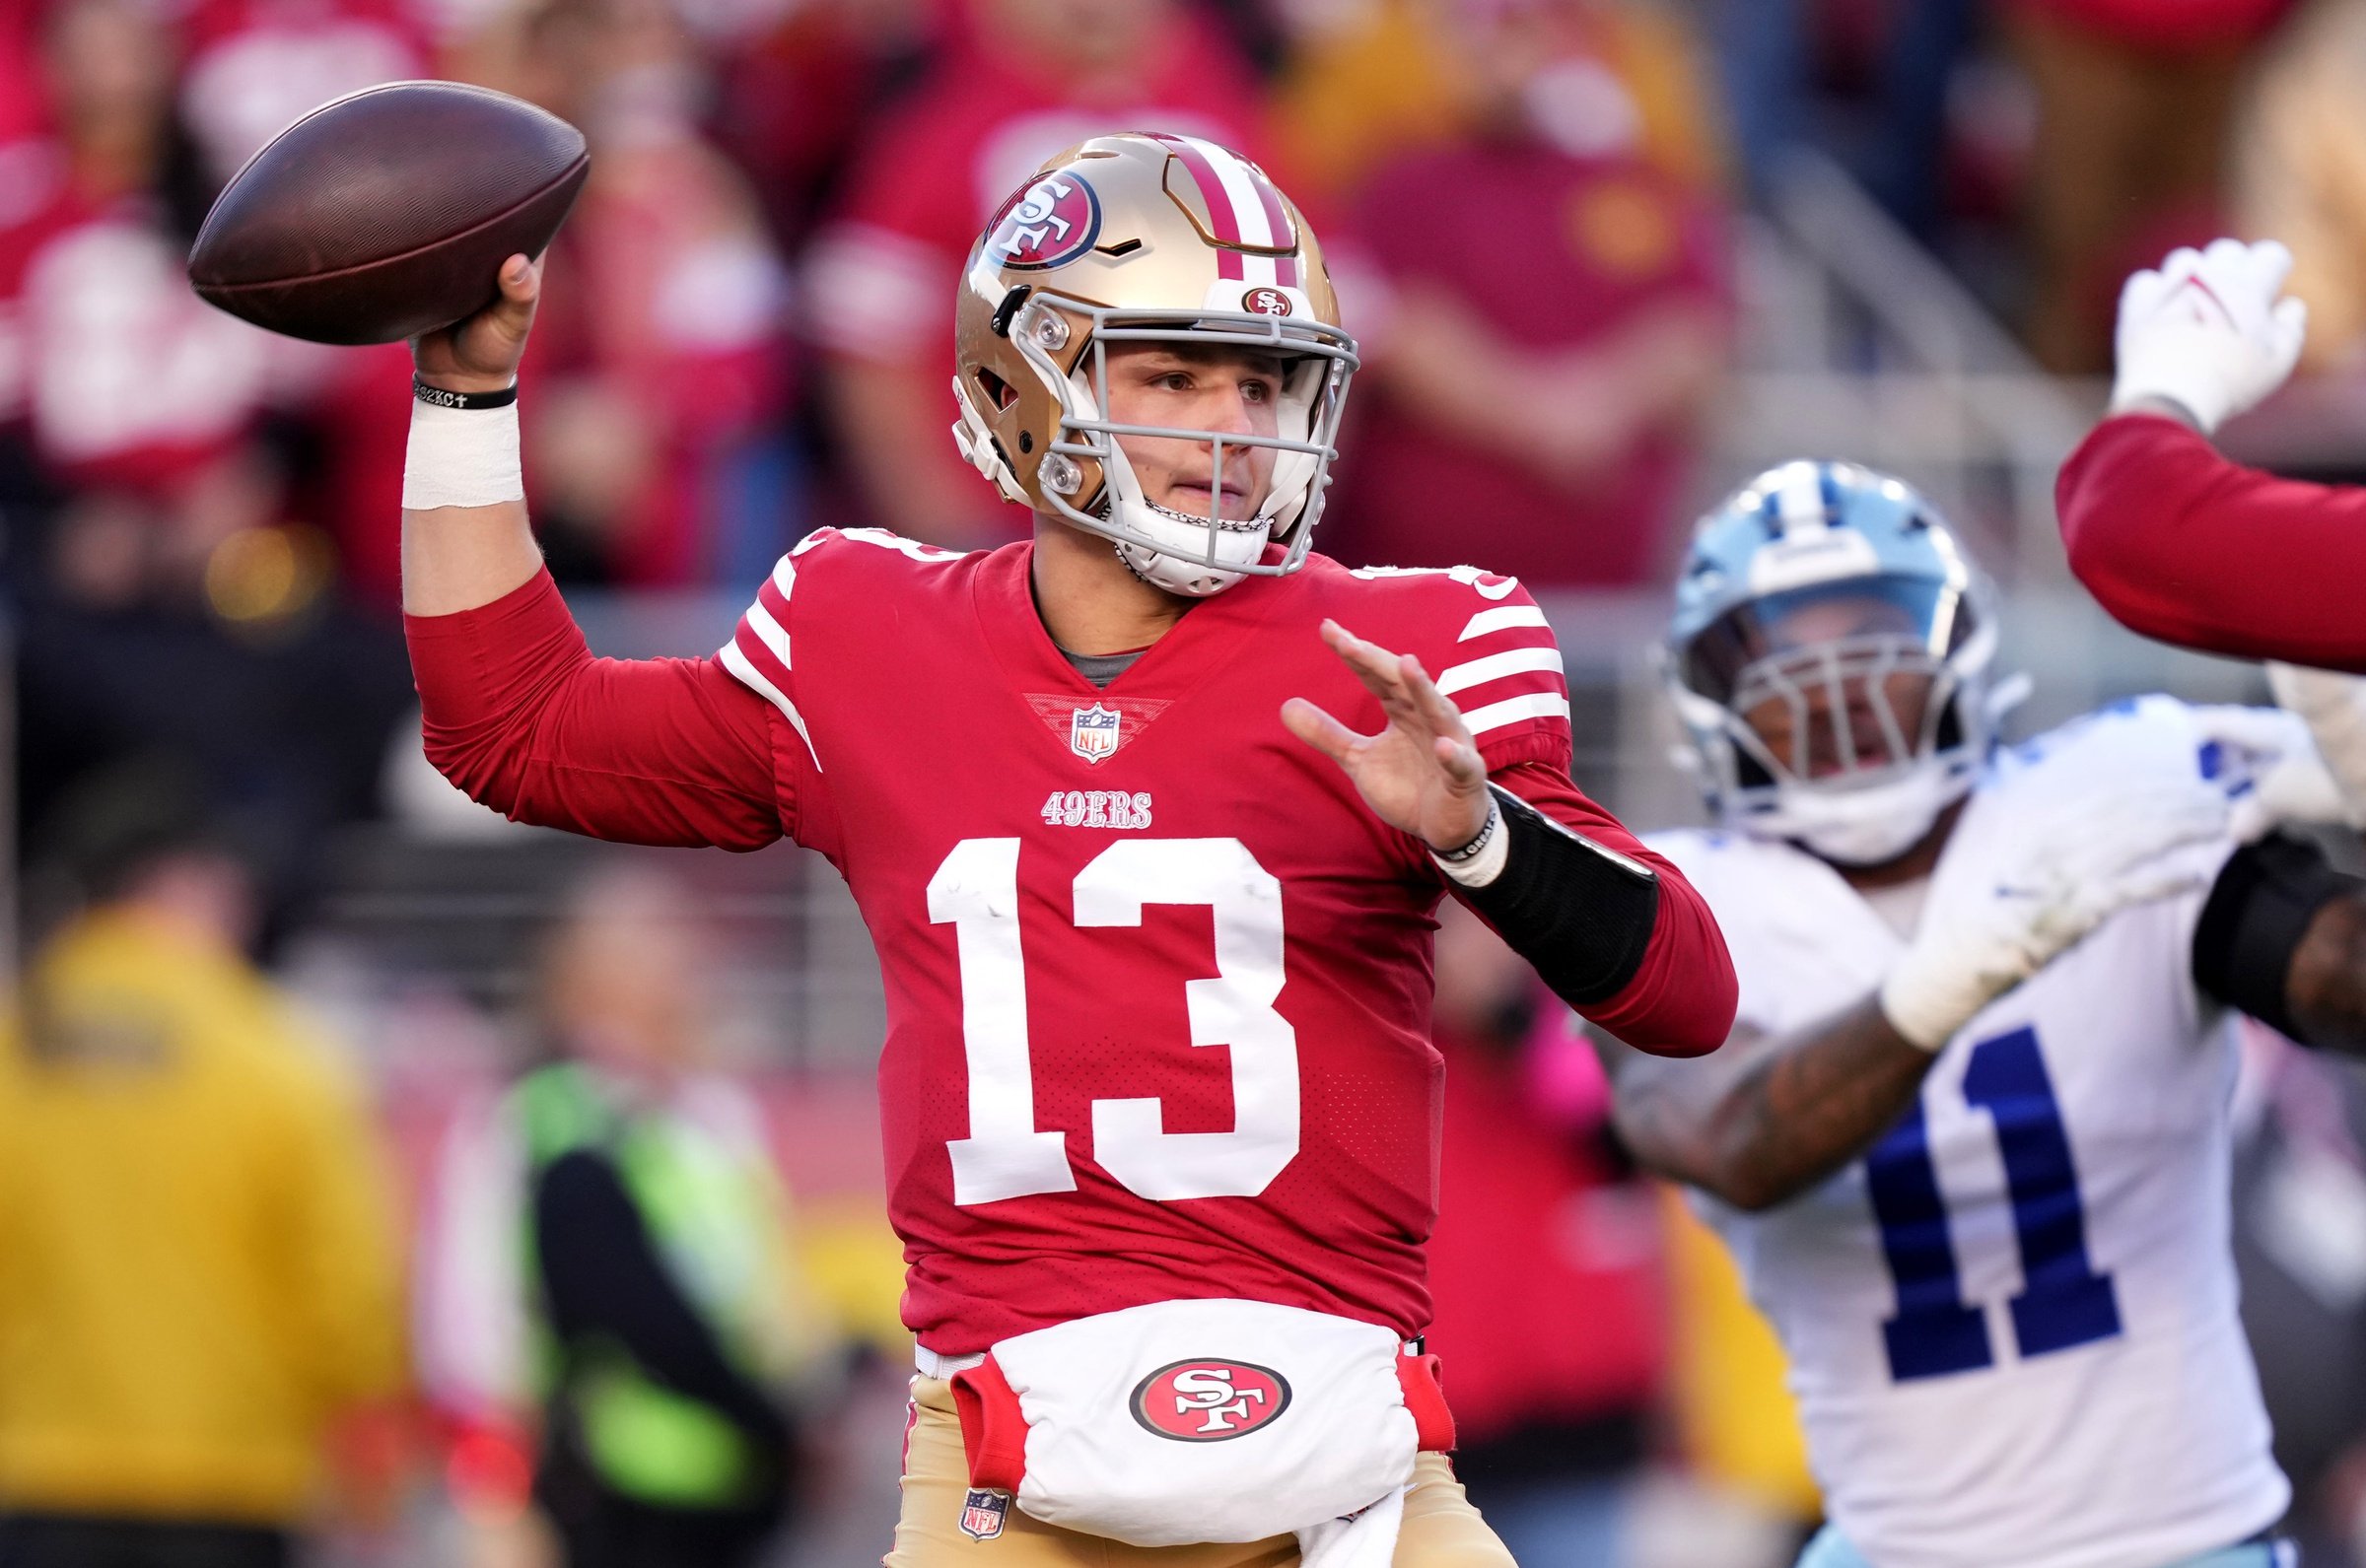 49ers vs. Eagles Prediction, Odds, and Picks for NFC Championship